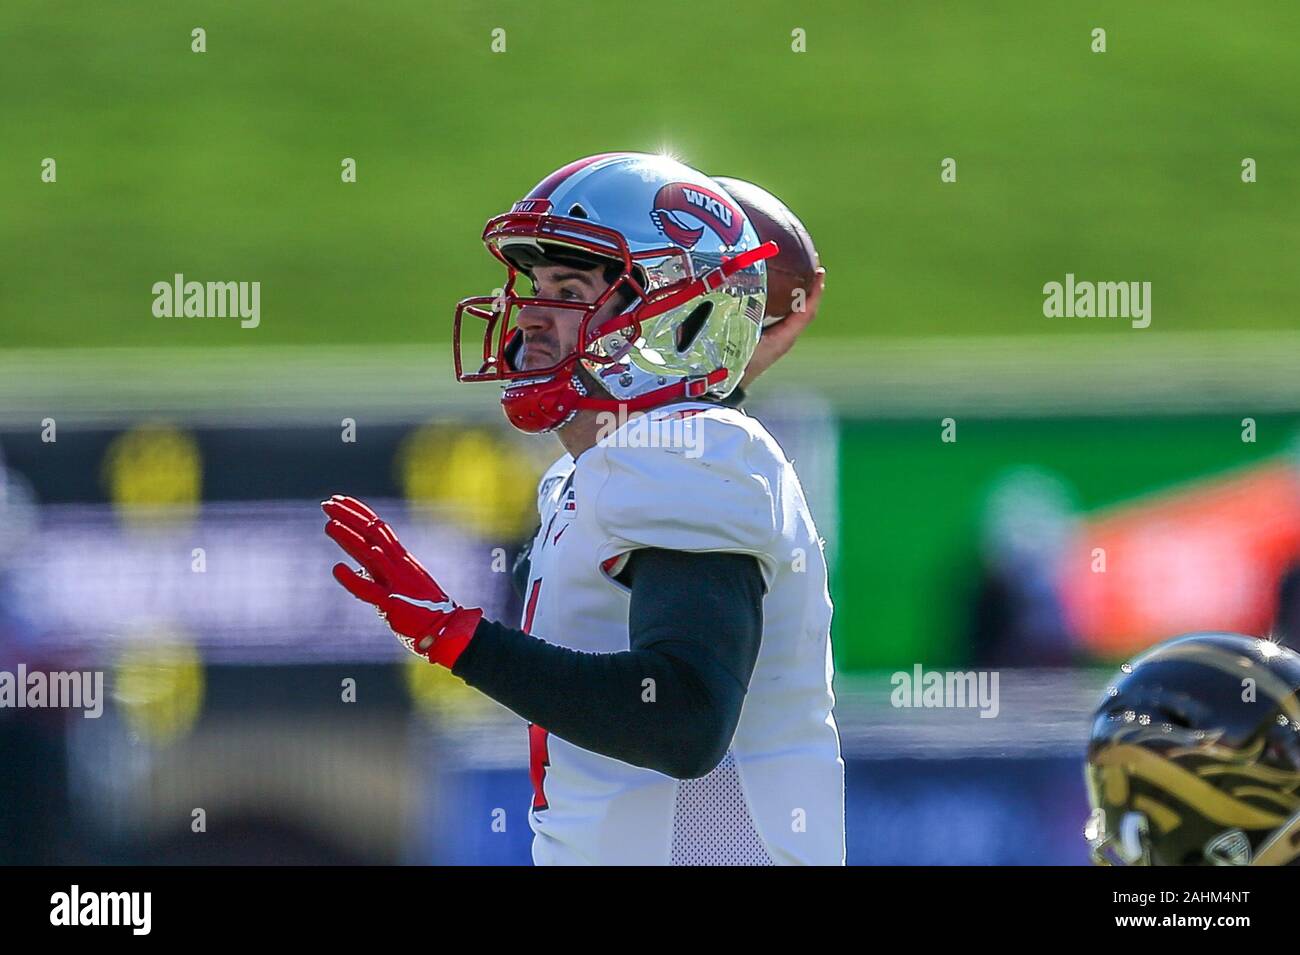 Dallas, Texas, USA. 30th Dec, 2019. Western Kentucky Hilltoppers quarterback Ty Storey (4) in action during the Servpro First Responder Bowl game between Western Michigan Broncos and the Western Kentucky Hilltoppers at the gerald Ford Stadiuml Stadium in Dallas, Texas. Credit: Dan Wozniak/ZUMA Wire/Alamy Live News Stock Photo